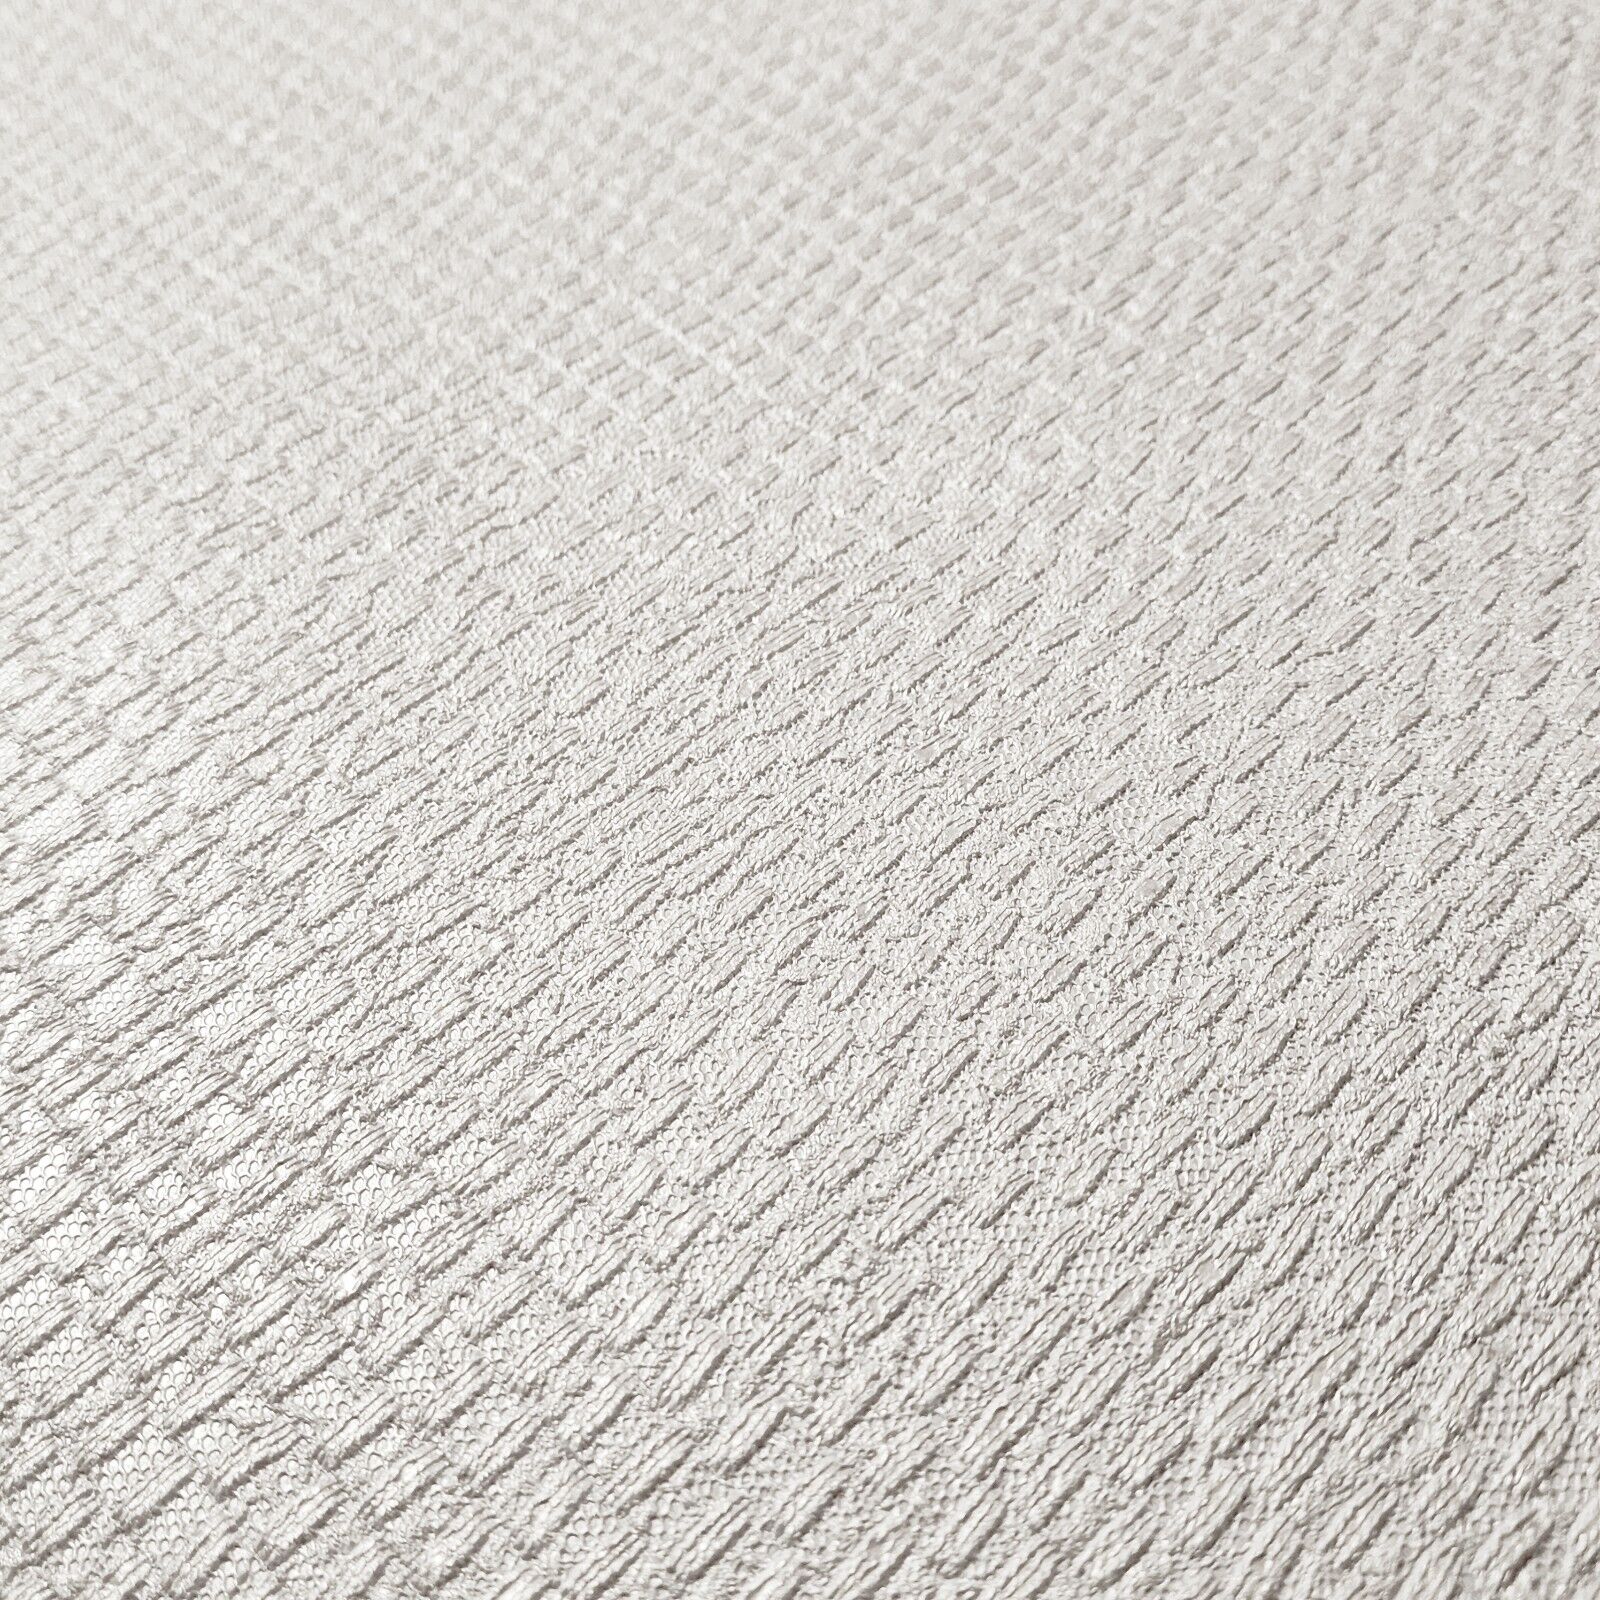 Z3439 Embossed Modern grayish off white faux woven fabric textured